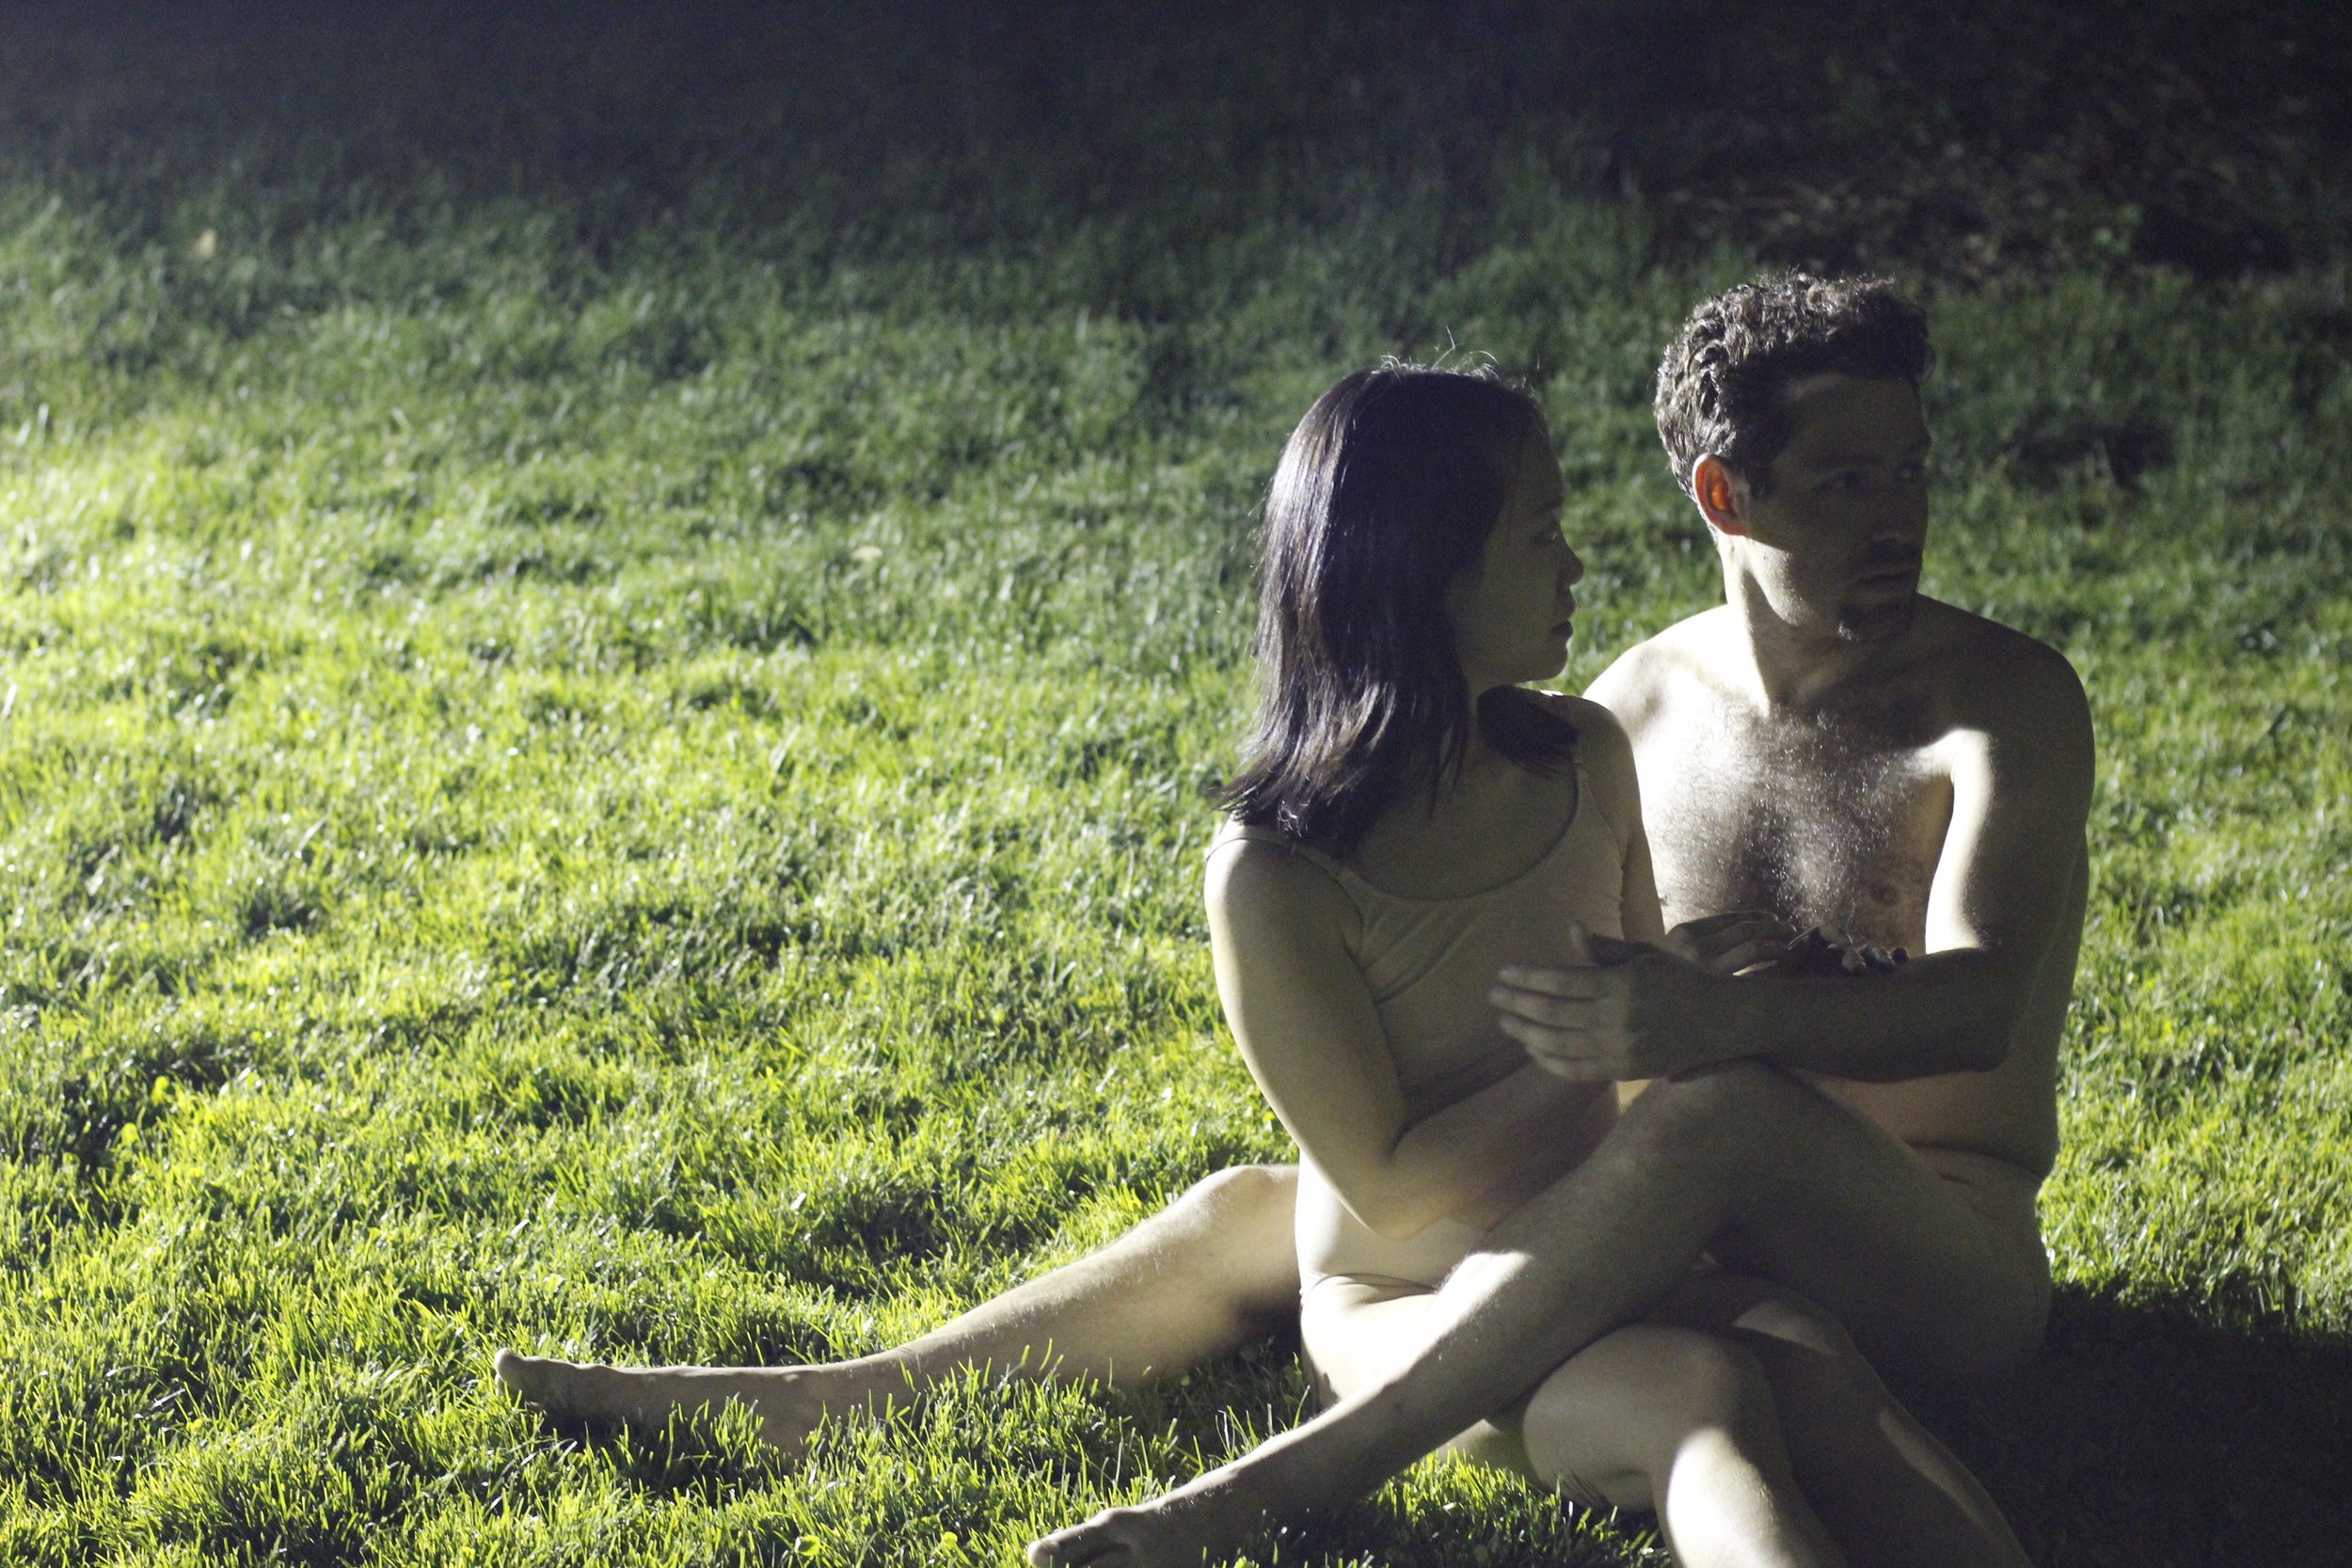 Two performers sit together, one's legs wrapped around the other, in a stream of light on green grass. Photo by Kevin Kwan.